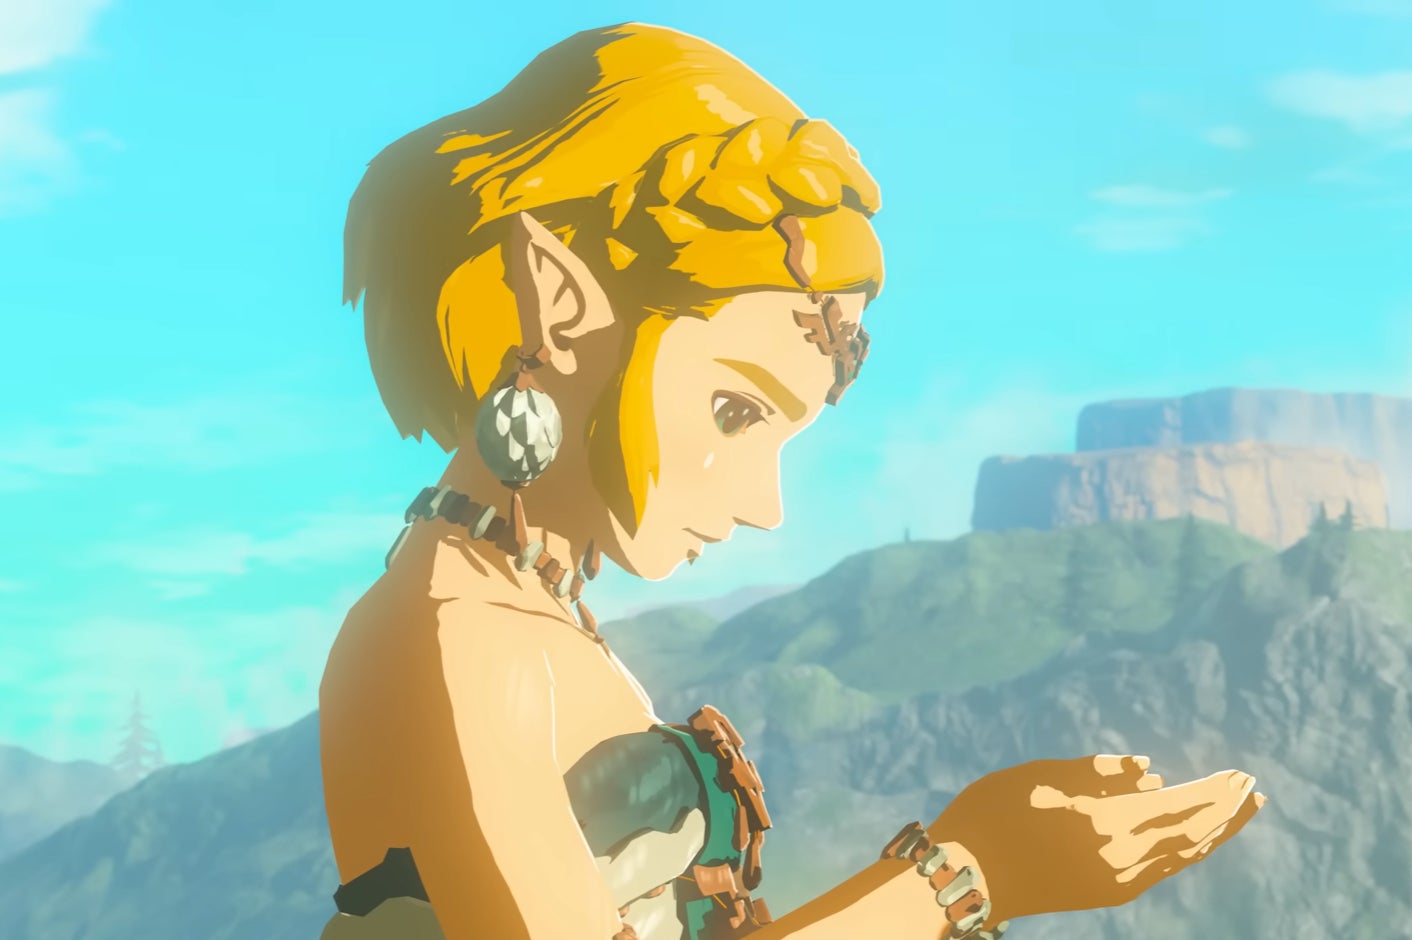 What Do We Want From a 'Legend of Zelda' Movie?